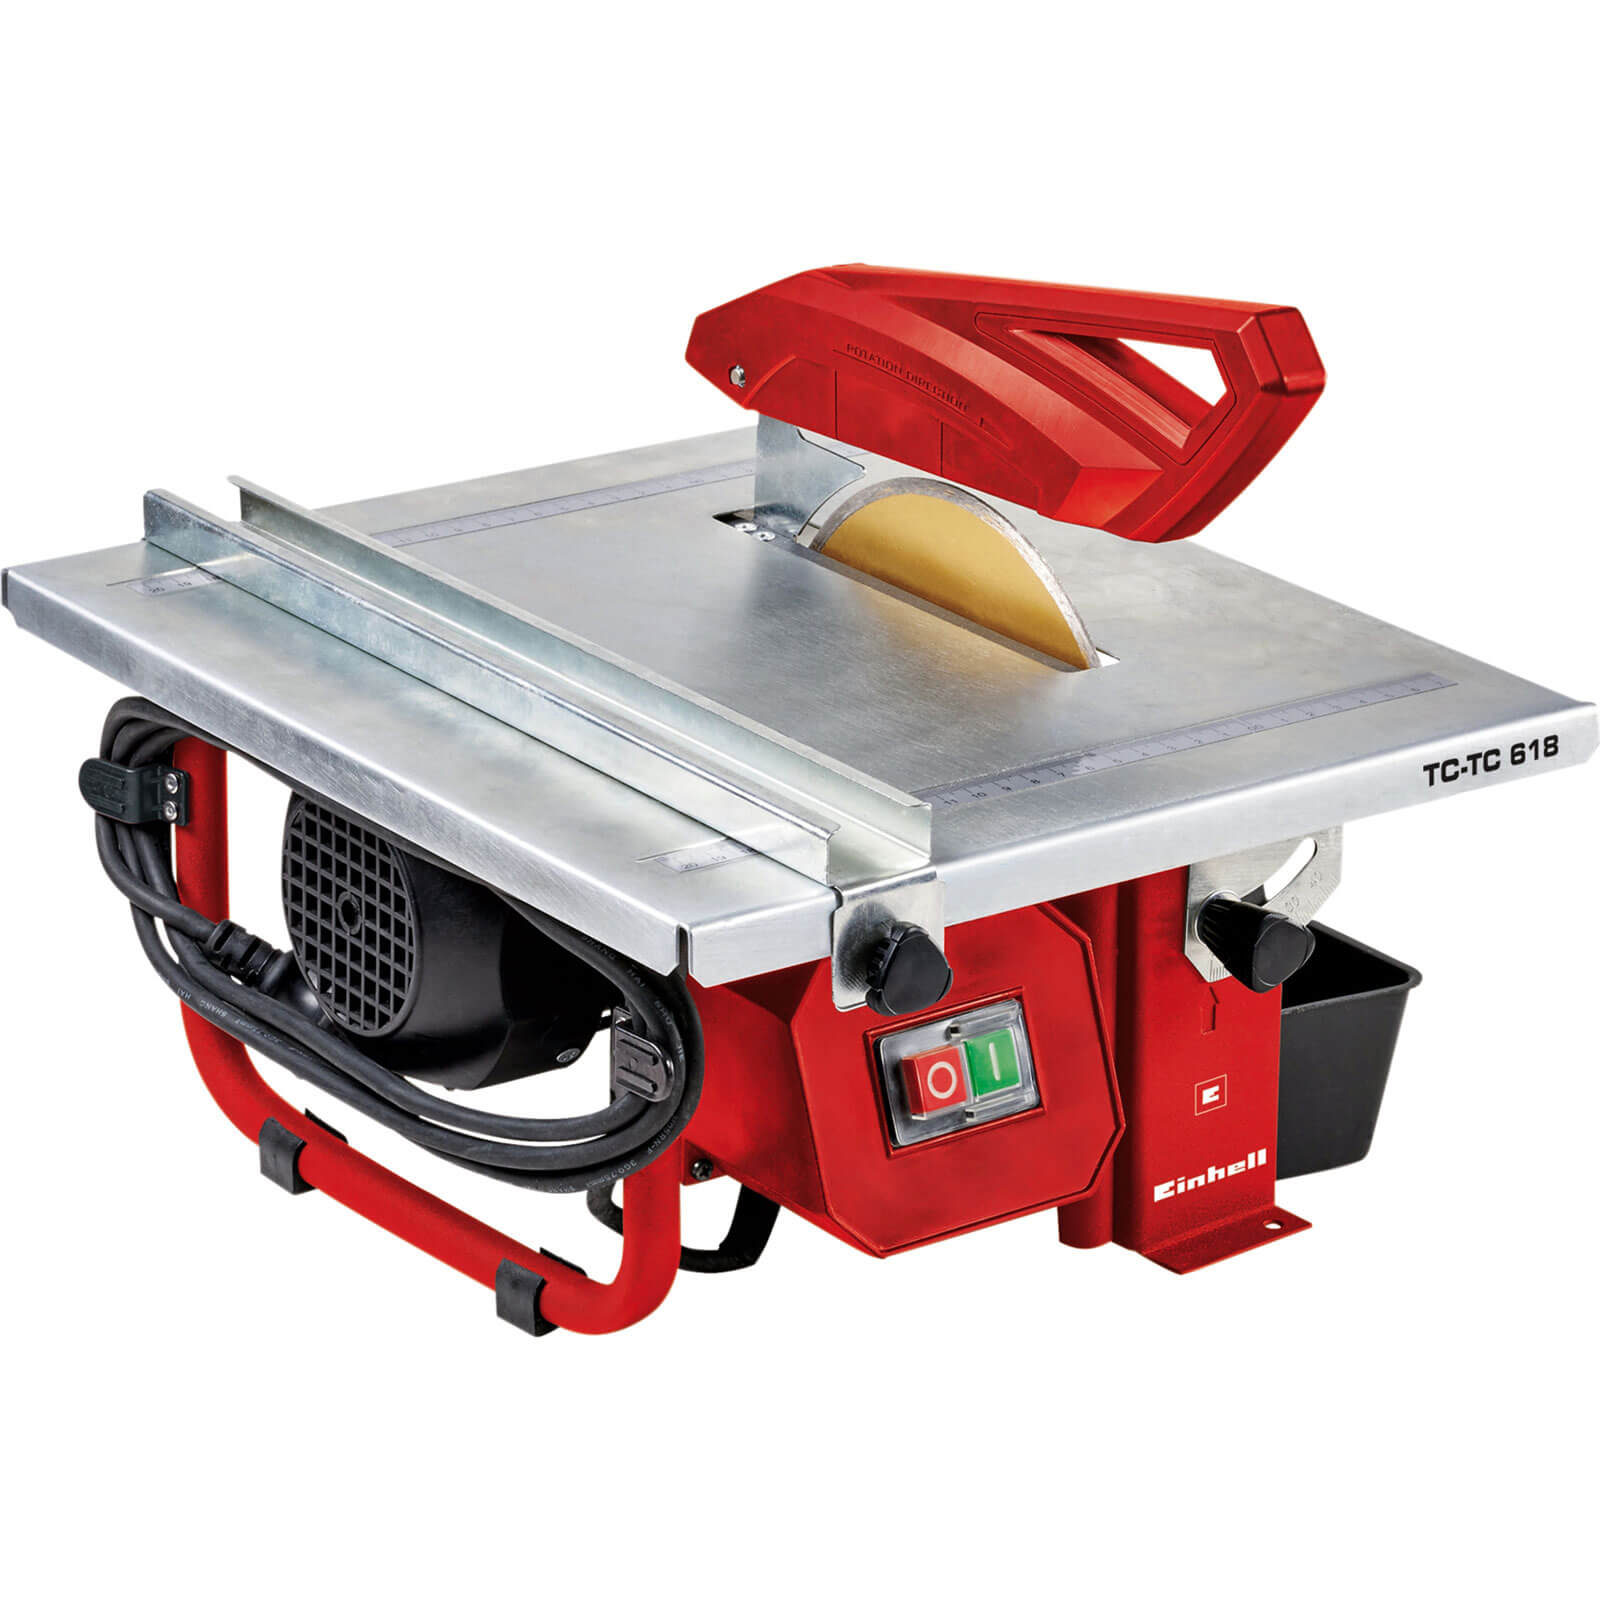 Photo of Einhell Tc-tc 618 Electric Tile Cutter 240v